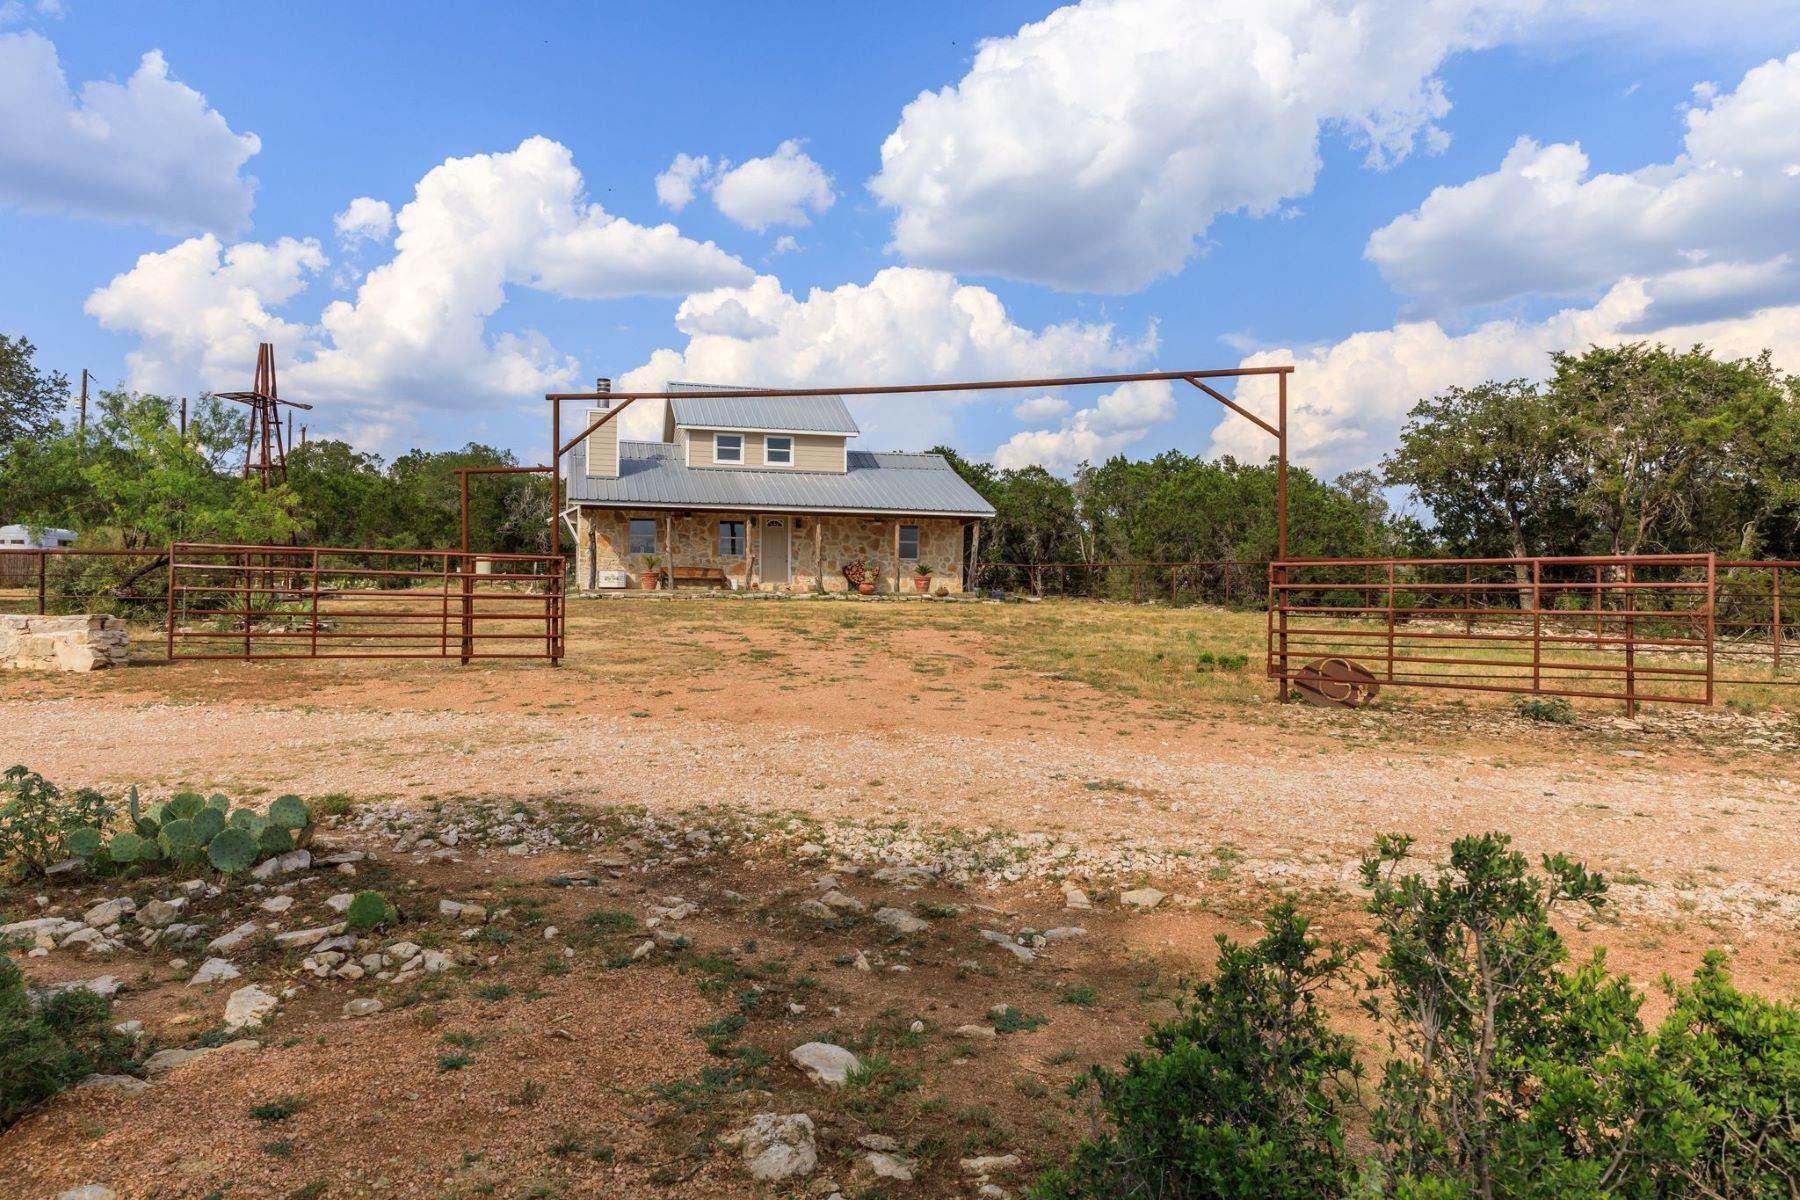 17. Farm and Ranch Properties at 154 Chevelle Road Bluffton, Texas 78607 United States